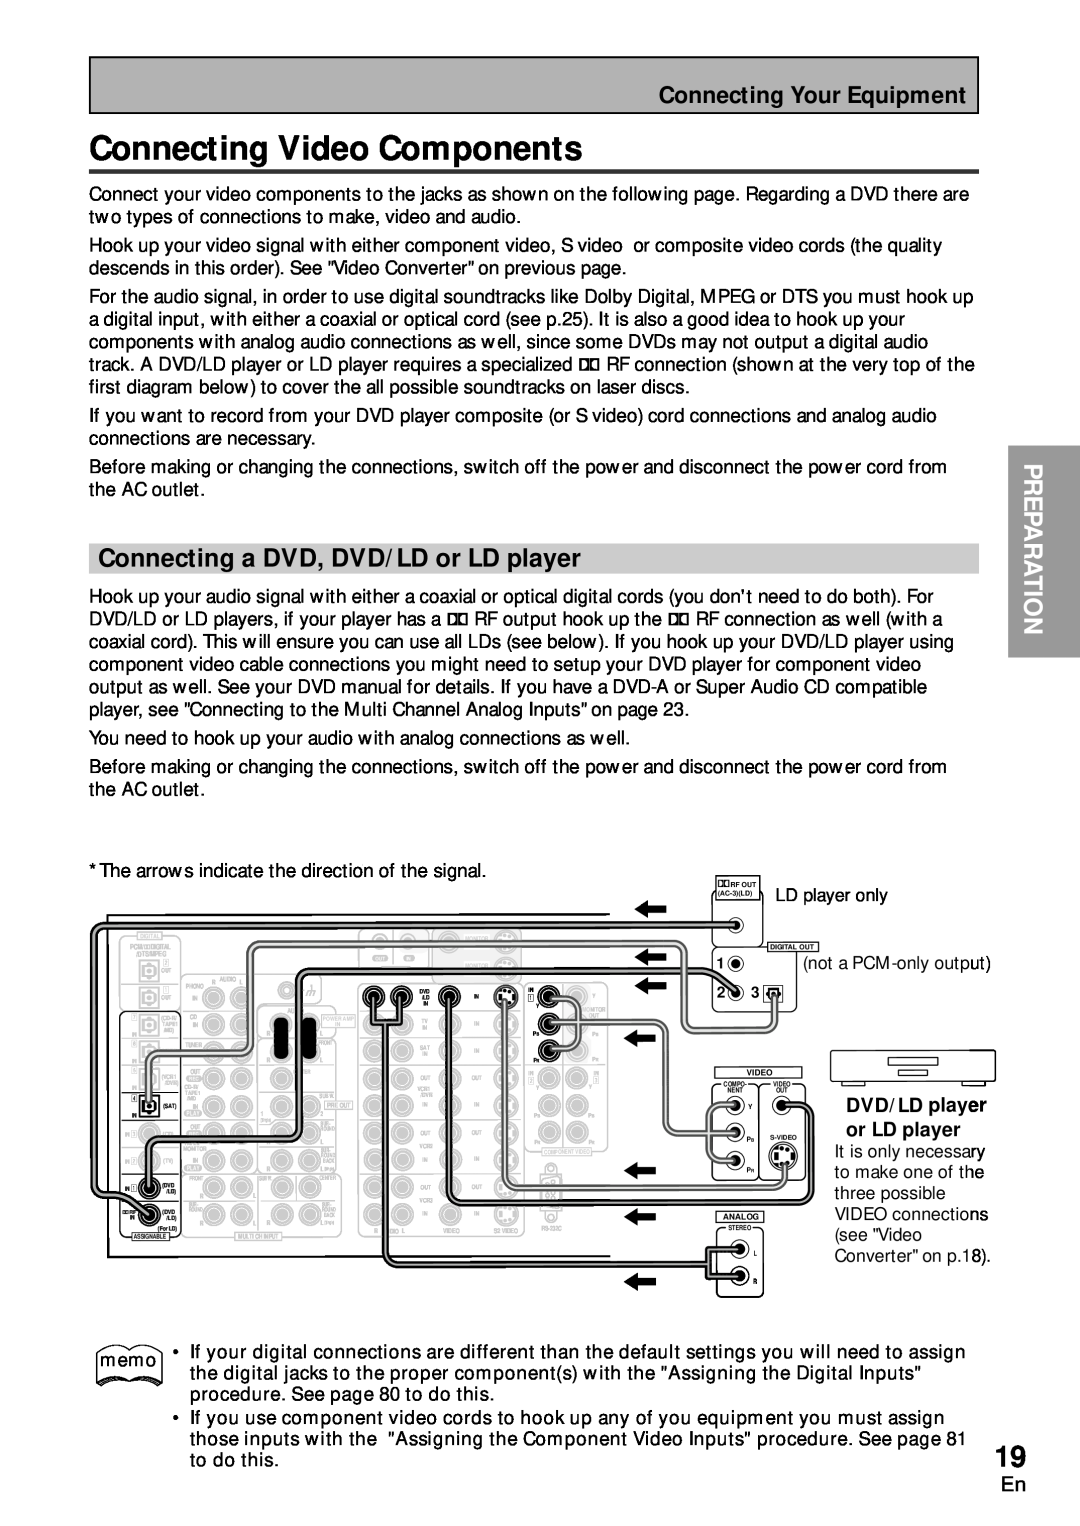 Pioneer VSA-AX10 operating instructions Connecting Video Components, Connecting a DVD, DVD/LD or LD player, Preparation 